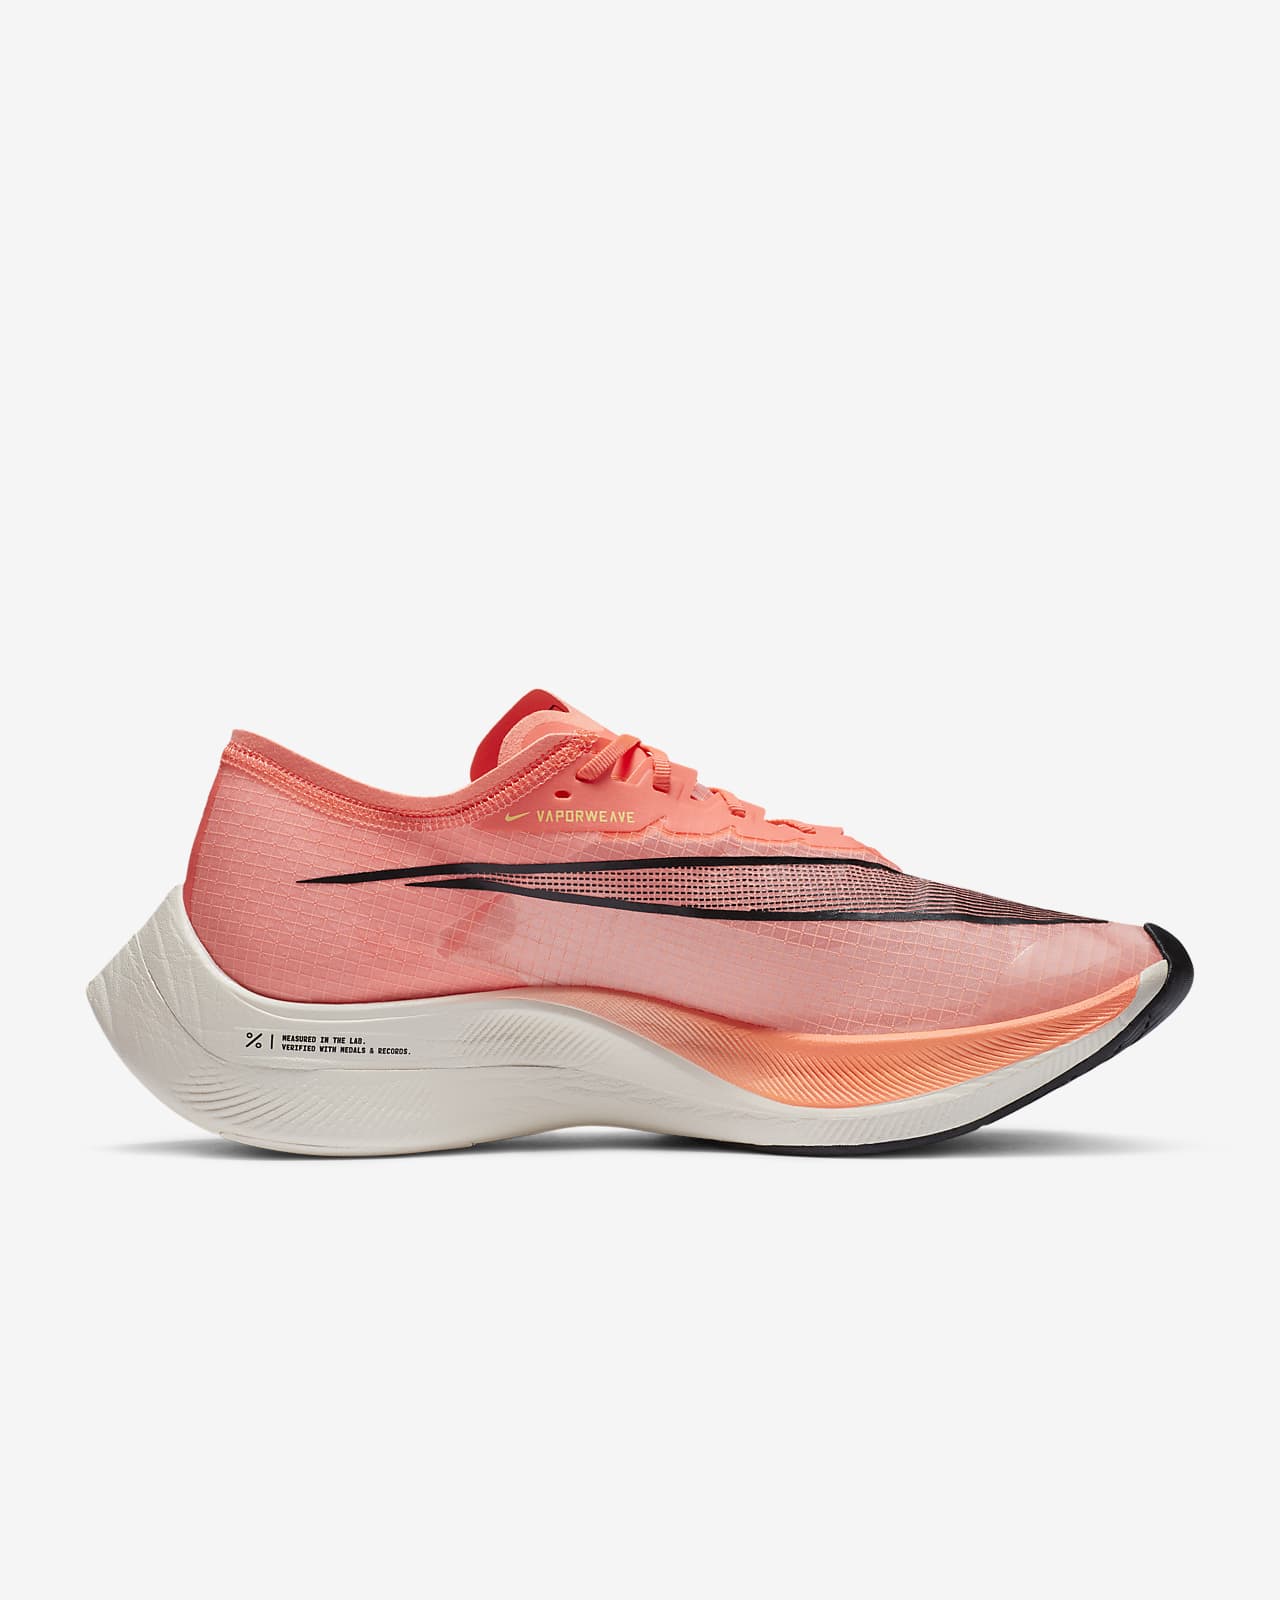 nike air zoomx vaporfly